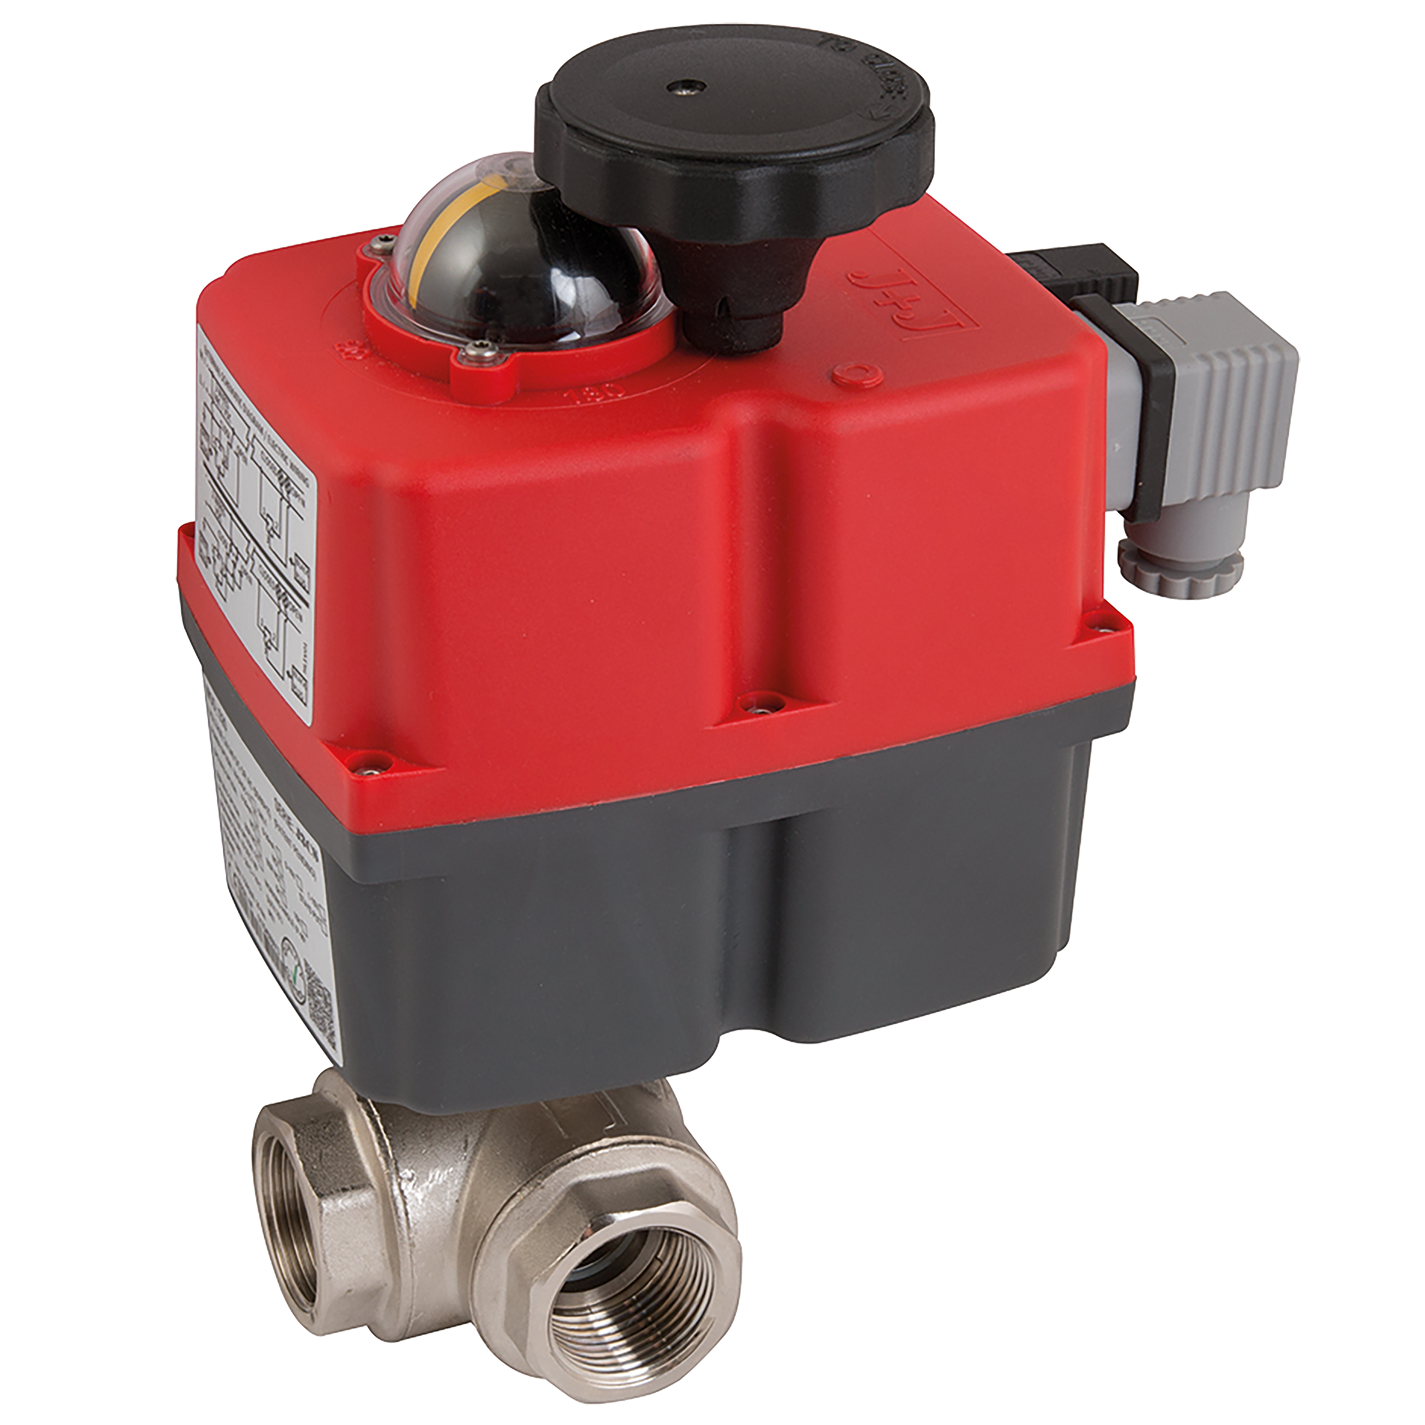 UK Suppliers of Electric Actuated Brass Ball Valve